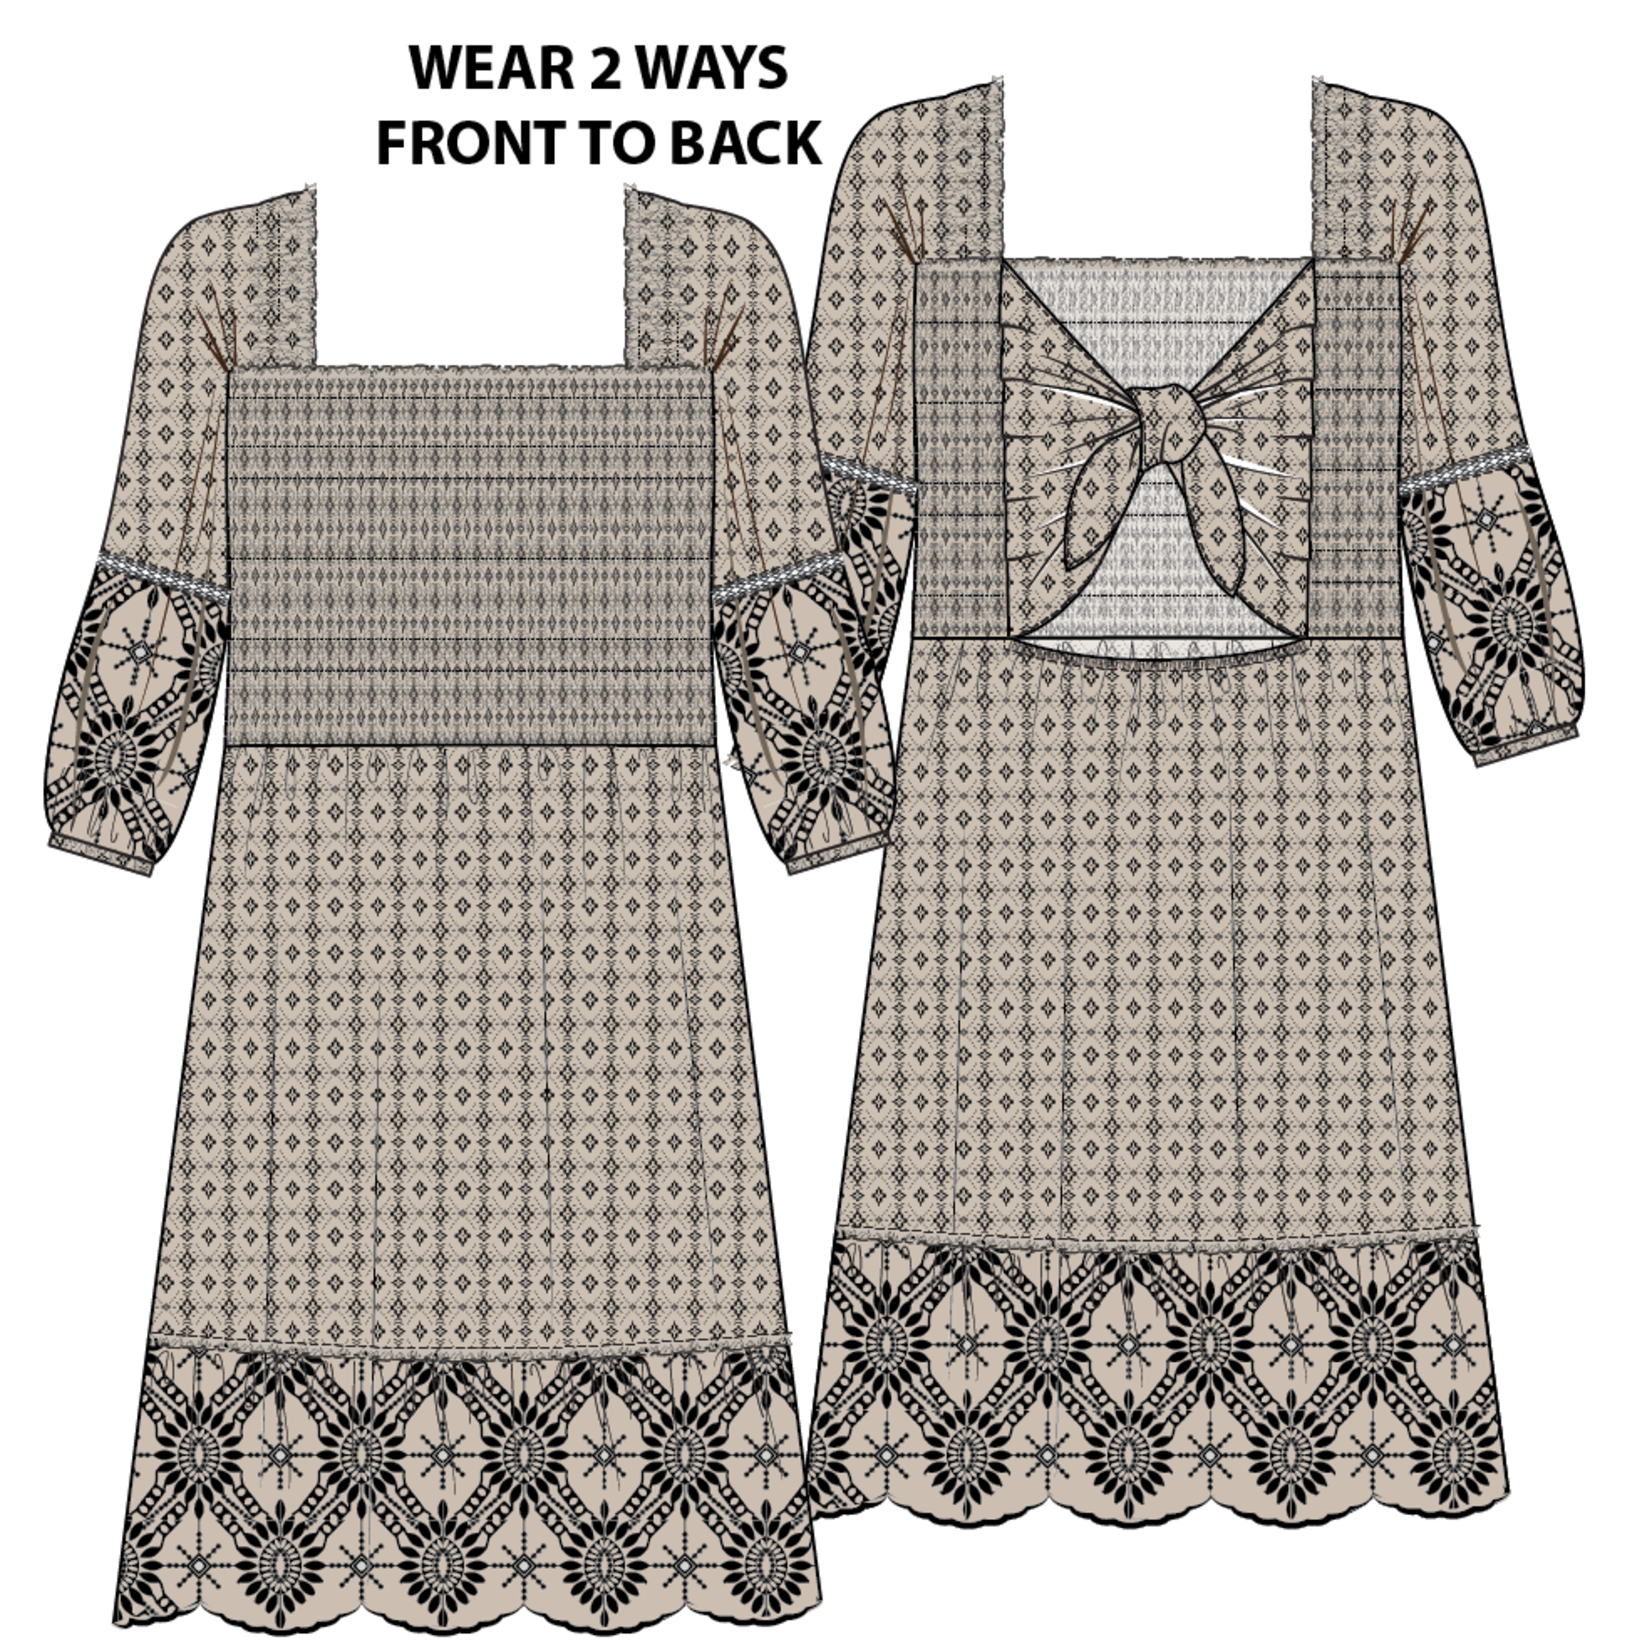 Tribal Wear 2 Ways Embroidered Dress